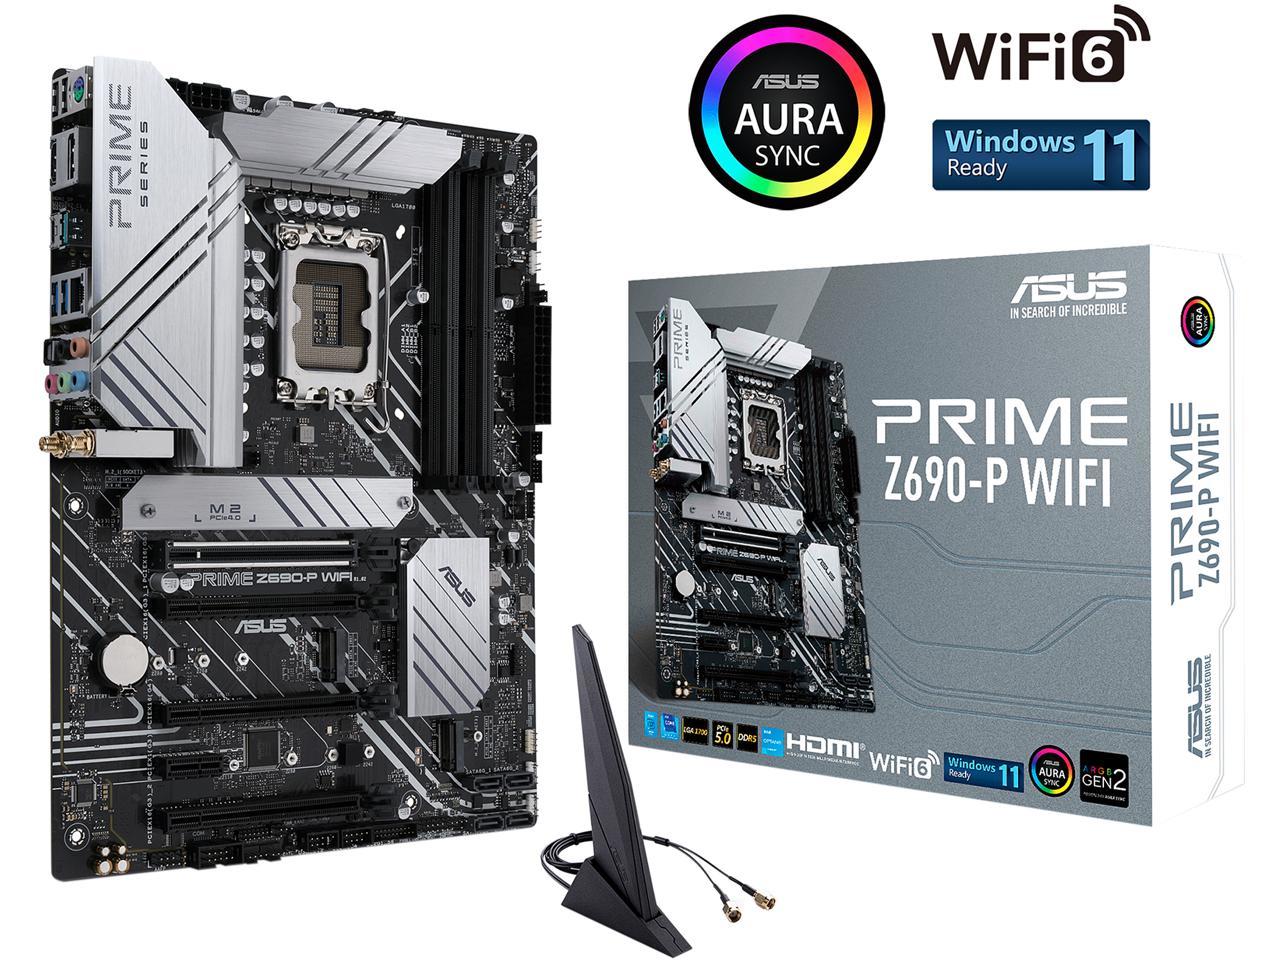 ASUS Prime Z690-P WiFi LGA 1700(Intel? 12th&13th Gen) ATX motherboard (PCIe 5.0,DDR5,14+1 Power Stages,3x M.2,WiFi 6,Bluetooth v5.2,2.5Gb LAN,front panel USB 3.2 Gen 1 Type-C?,Thunderbolt? 4 support, Arua Sync)